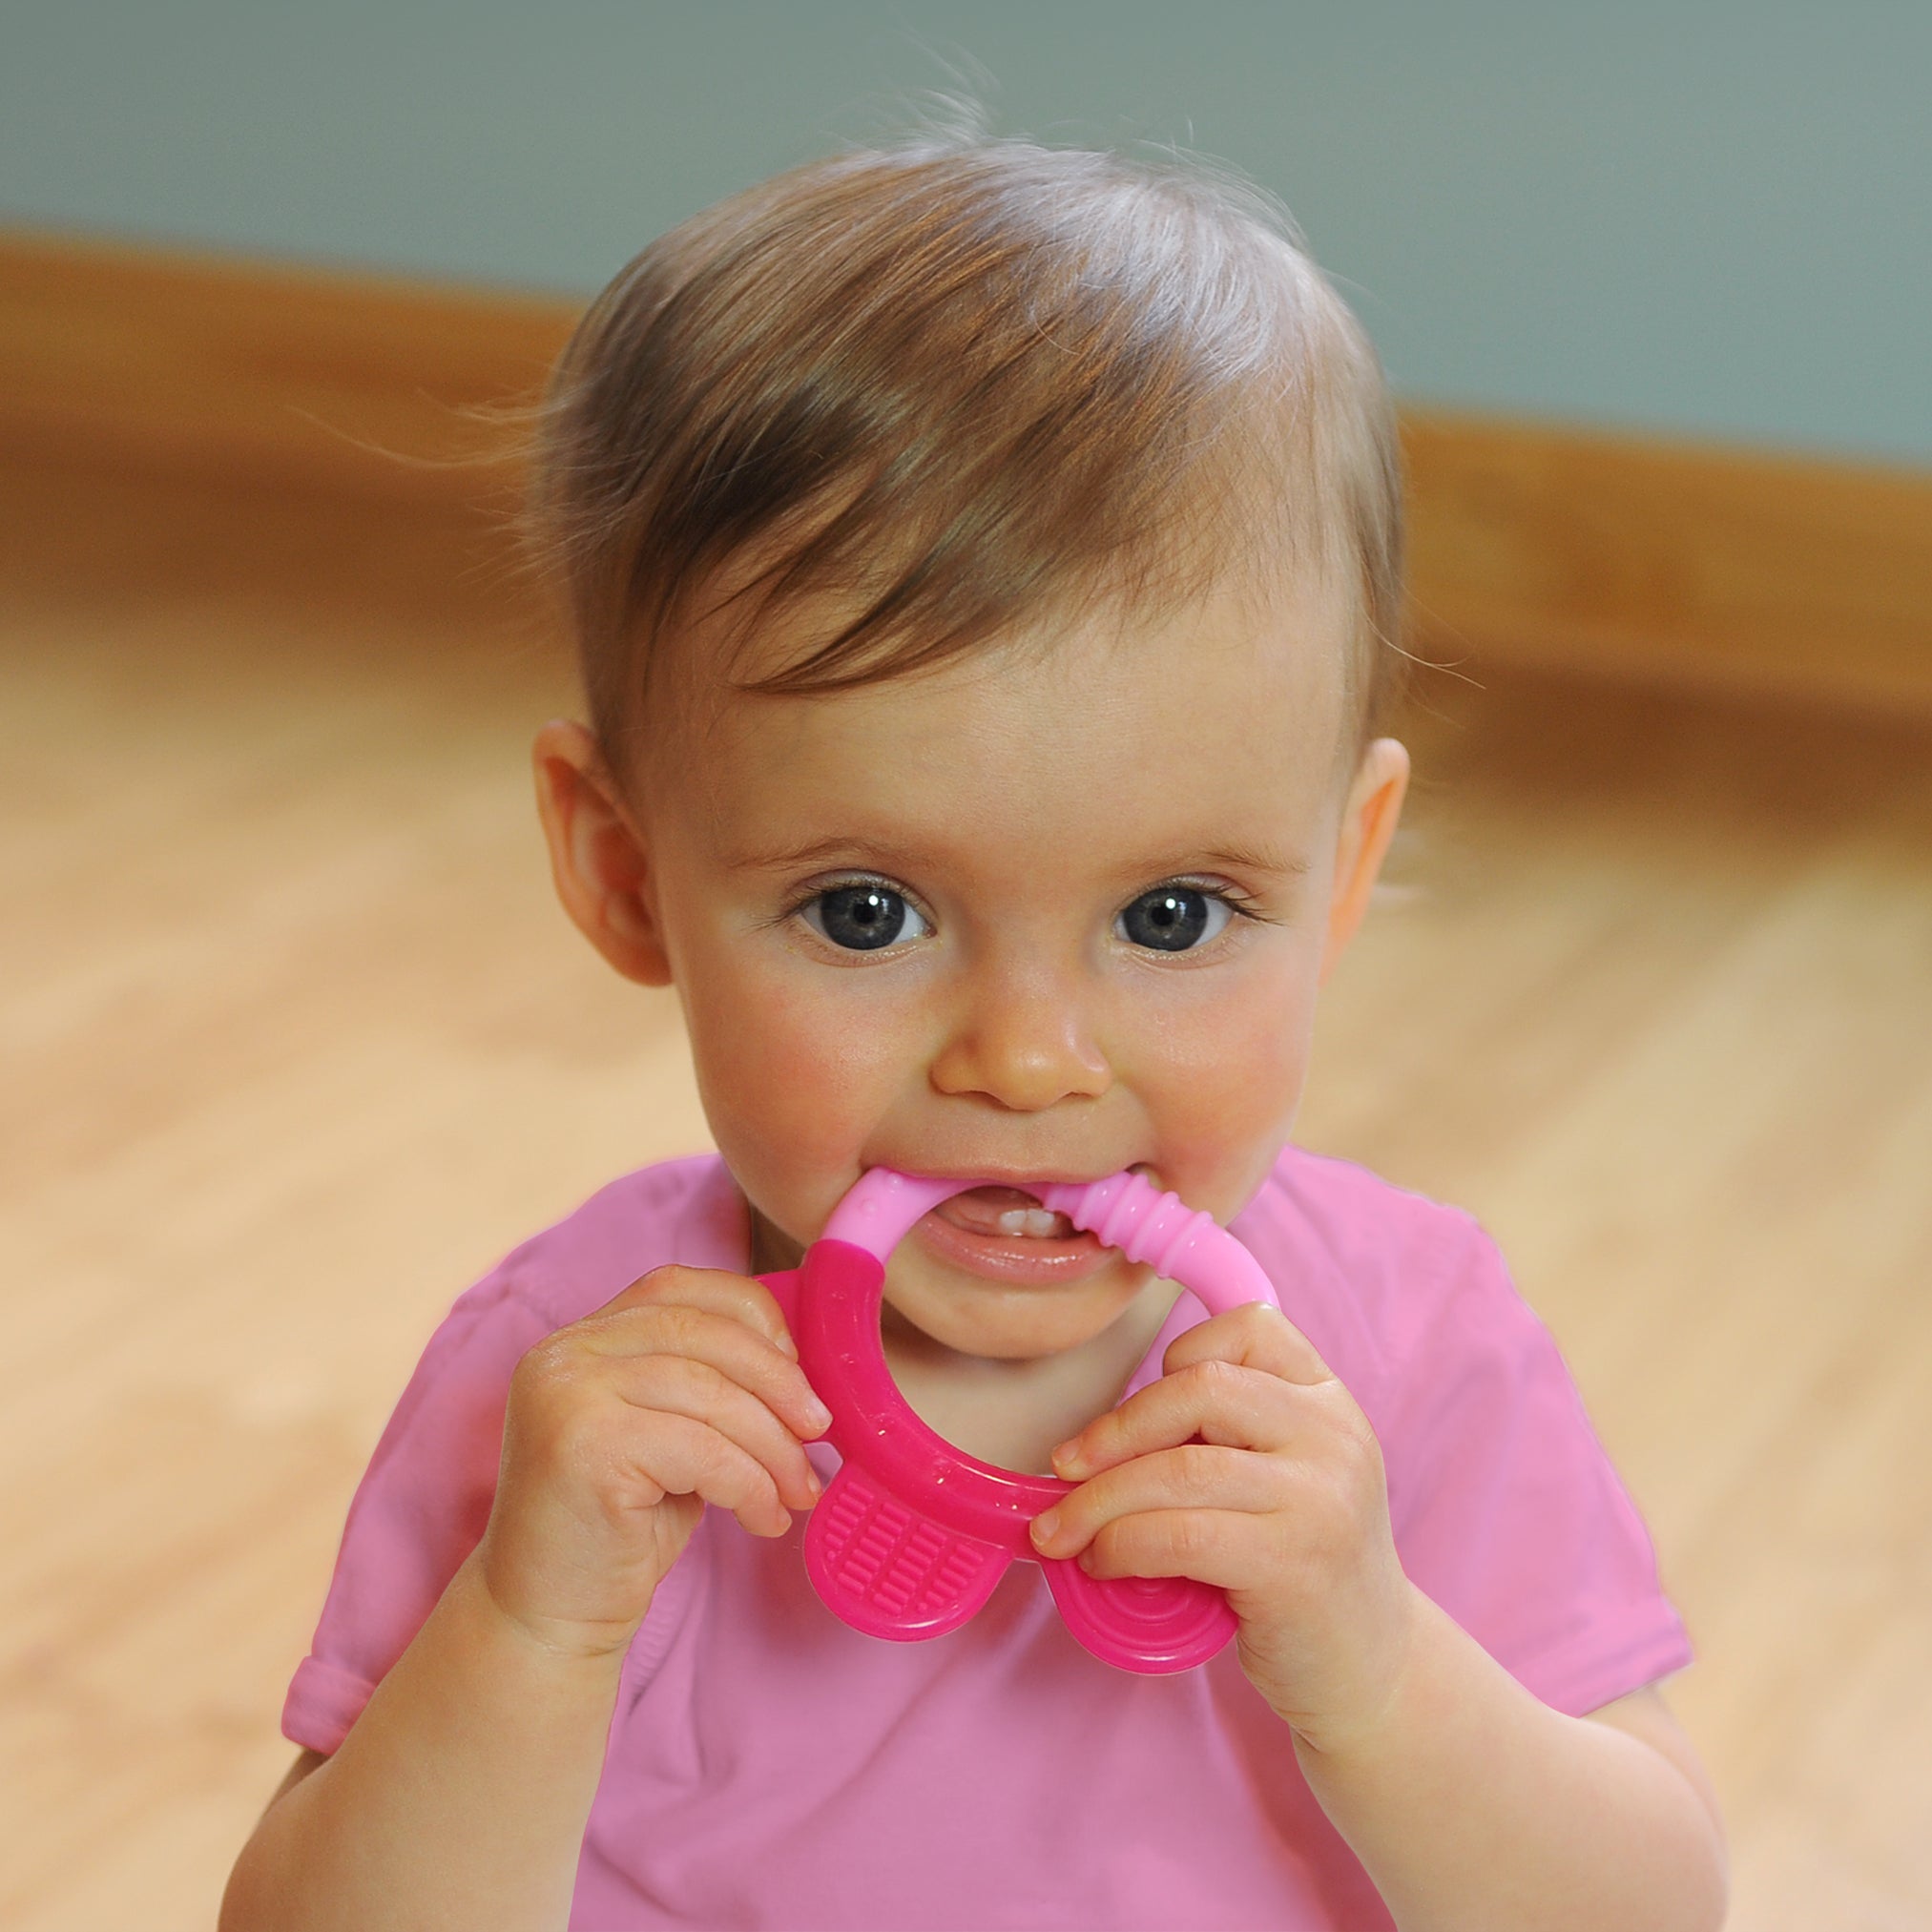 A wide-eyed 6 month old girl looking intently while gripping the pink Everyday Teether made from Silicone to her little mouth.